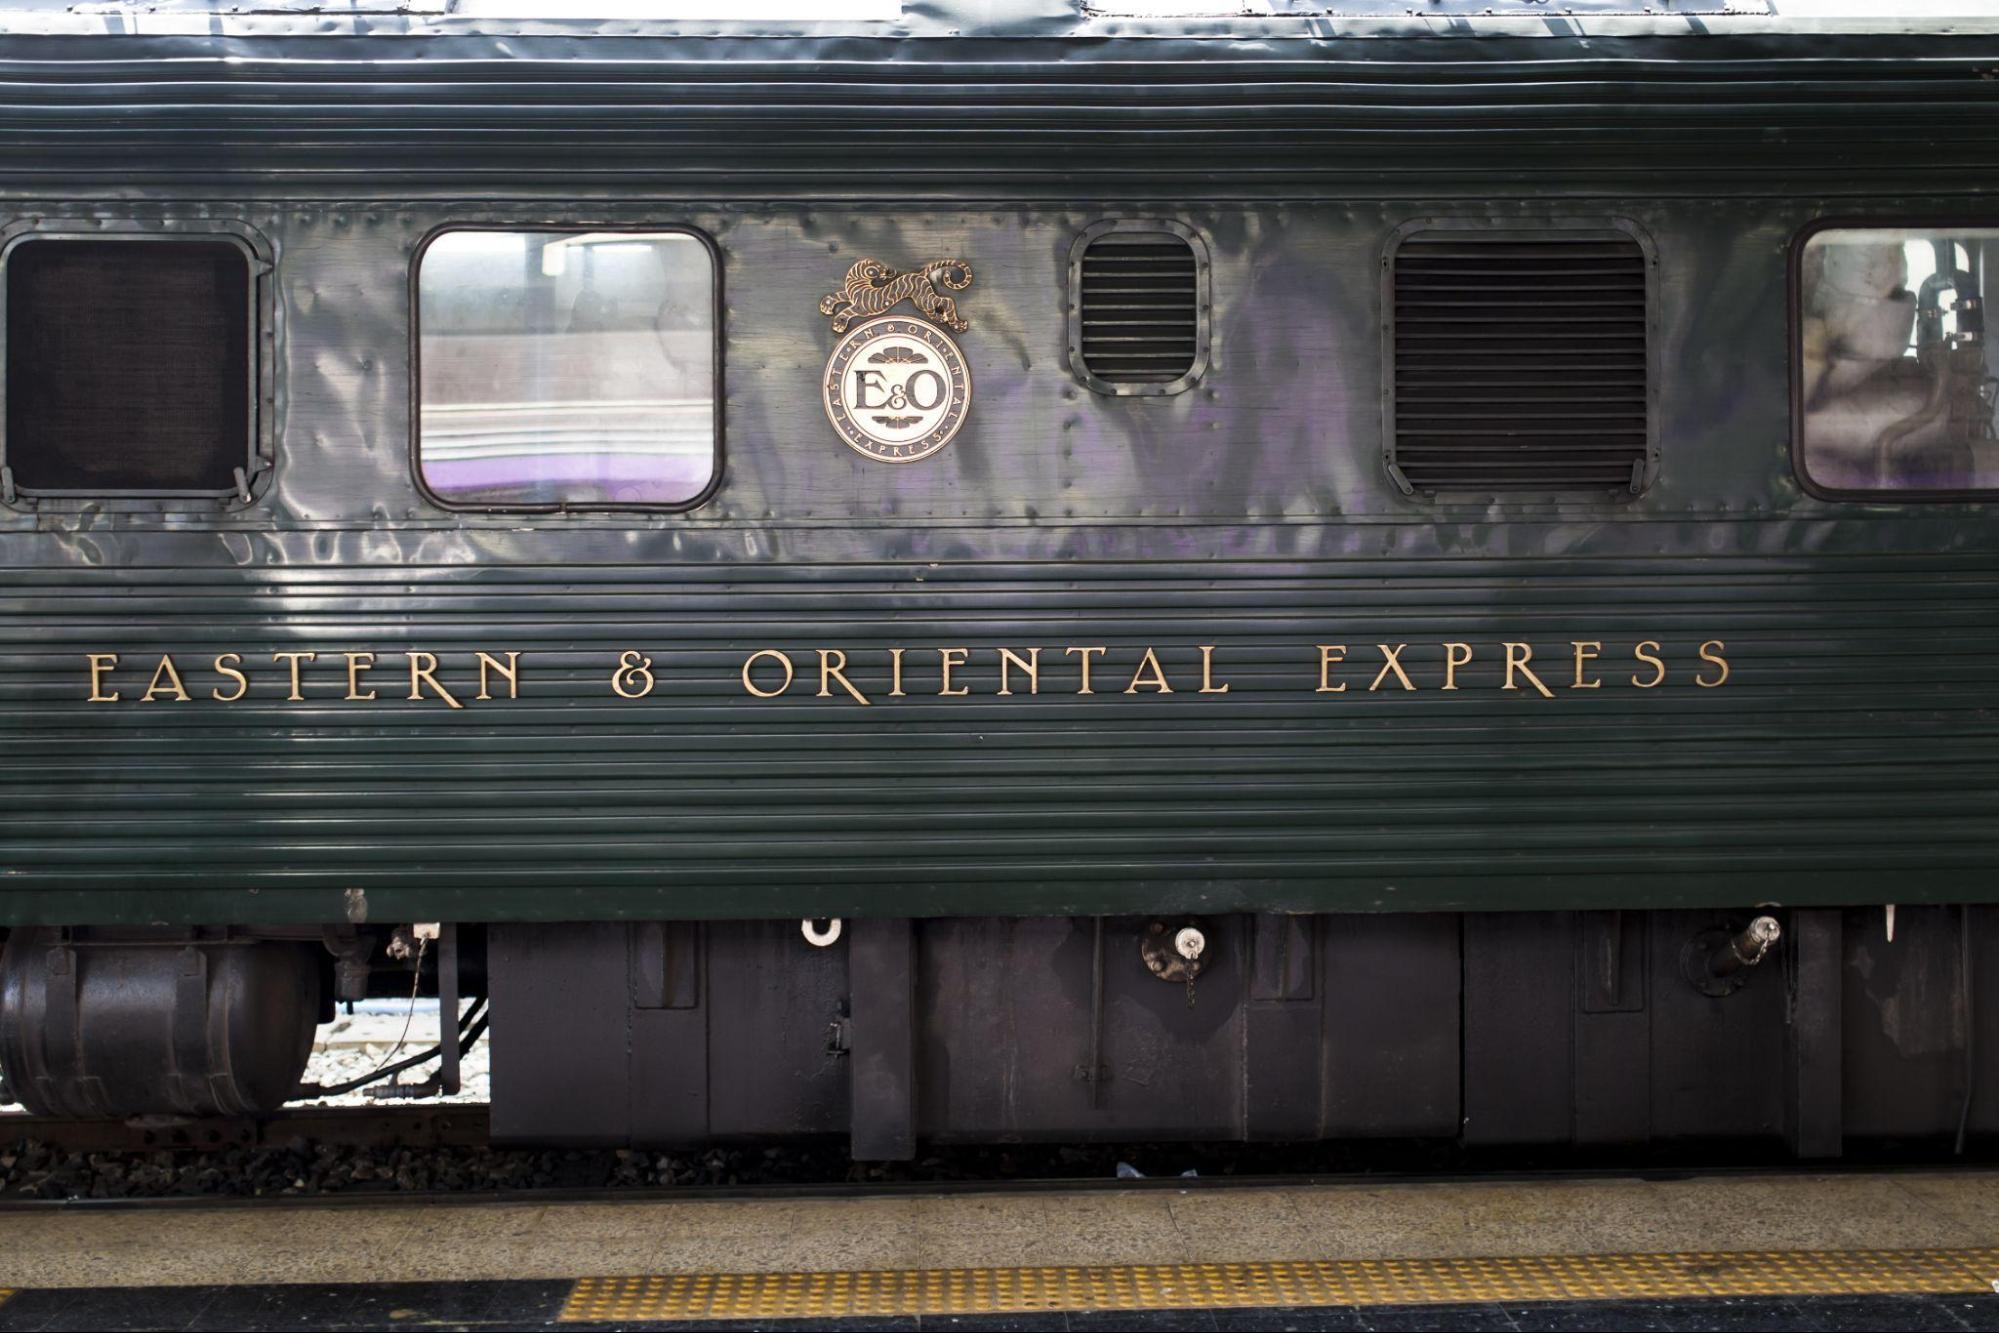 Eastern and Oriental express